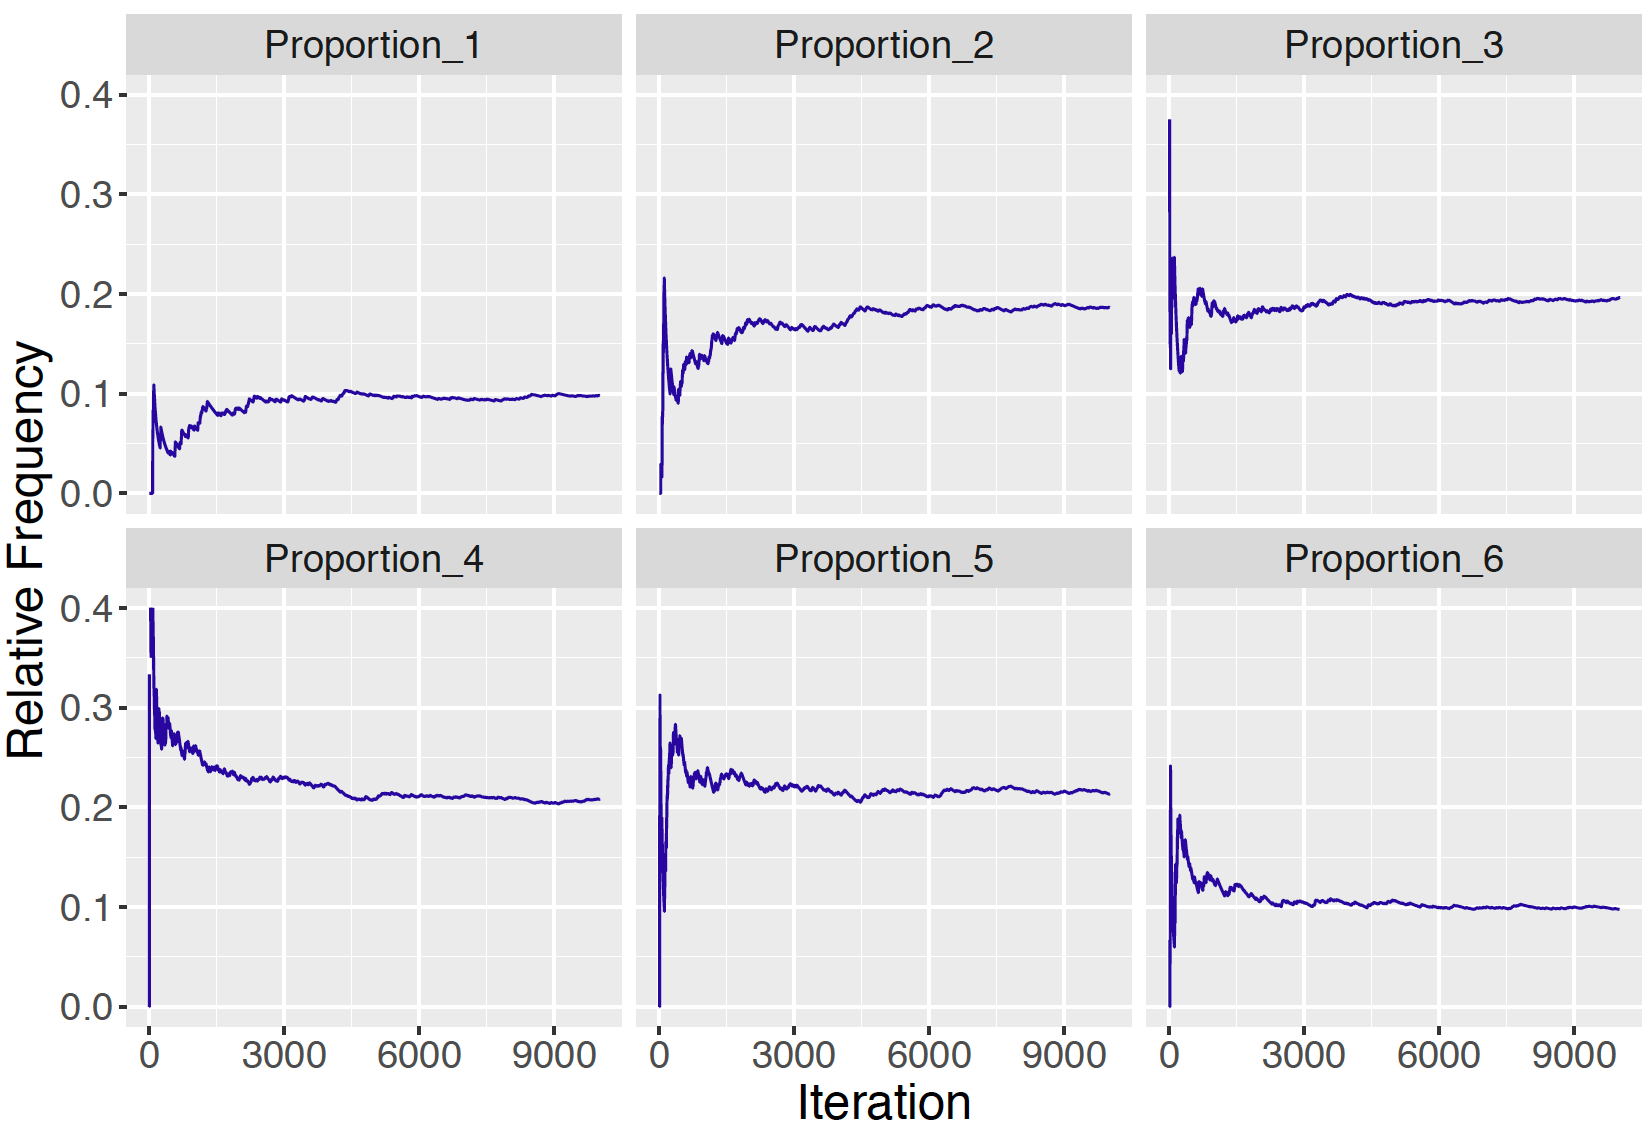 Relative frequencies of the states 1 through 6 as a function of the number of iterations for Markov chain simulation.  As the number of iterations increases, the relative frequencies appear to approach the probabilities in the stationary distribution $w = (0.1, 0.2, 0.2, 0.2, 0.2, 0.1)$.